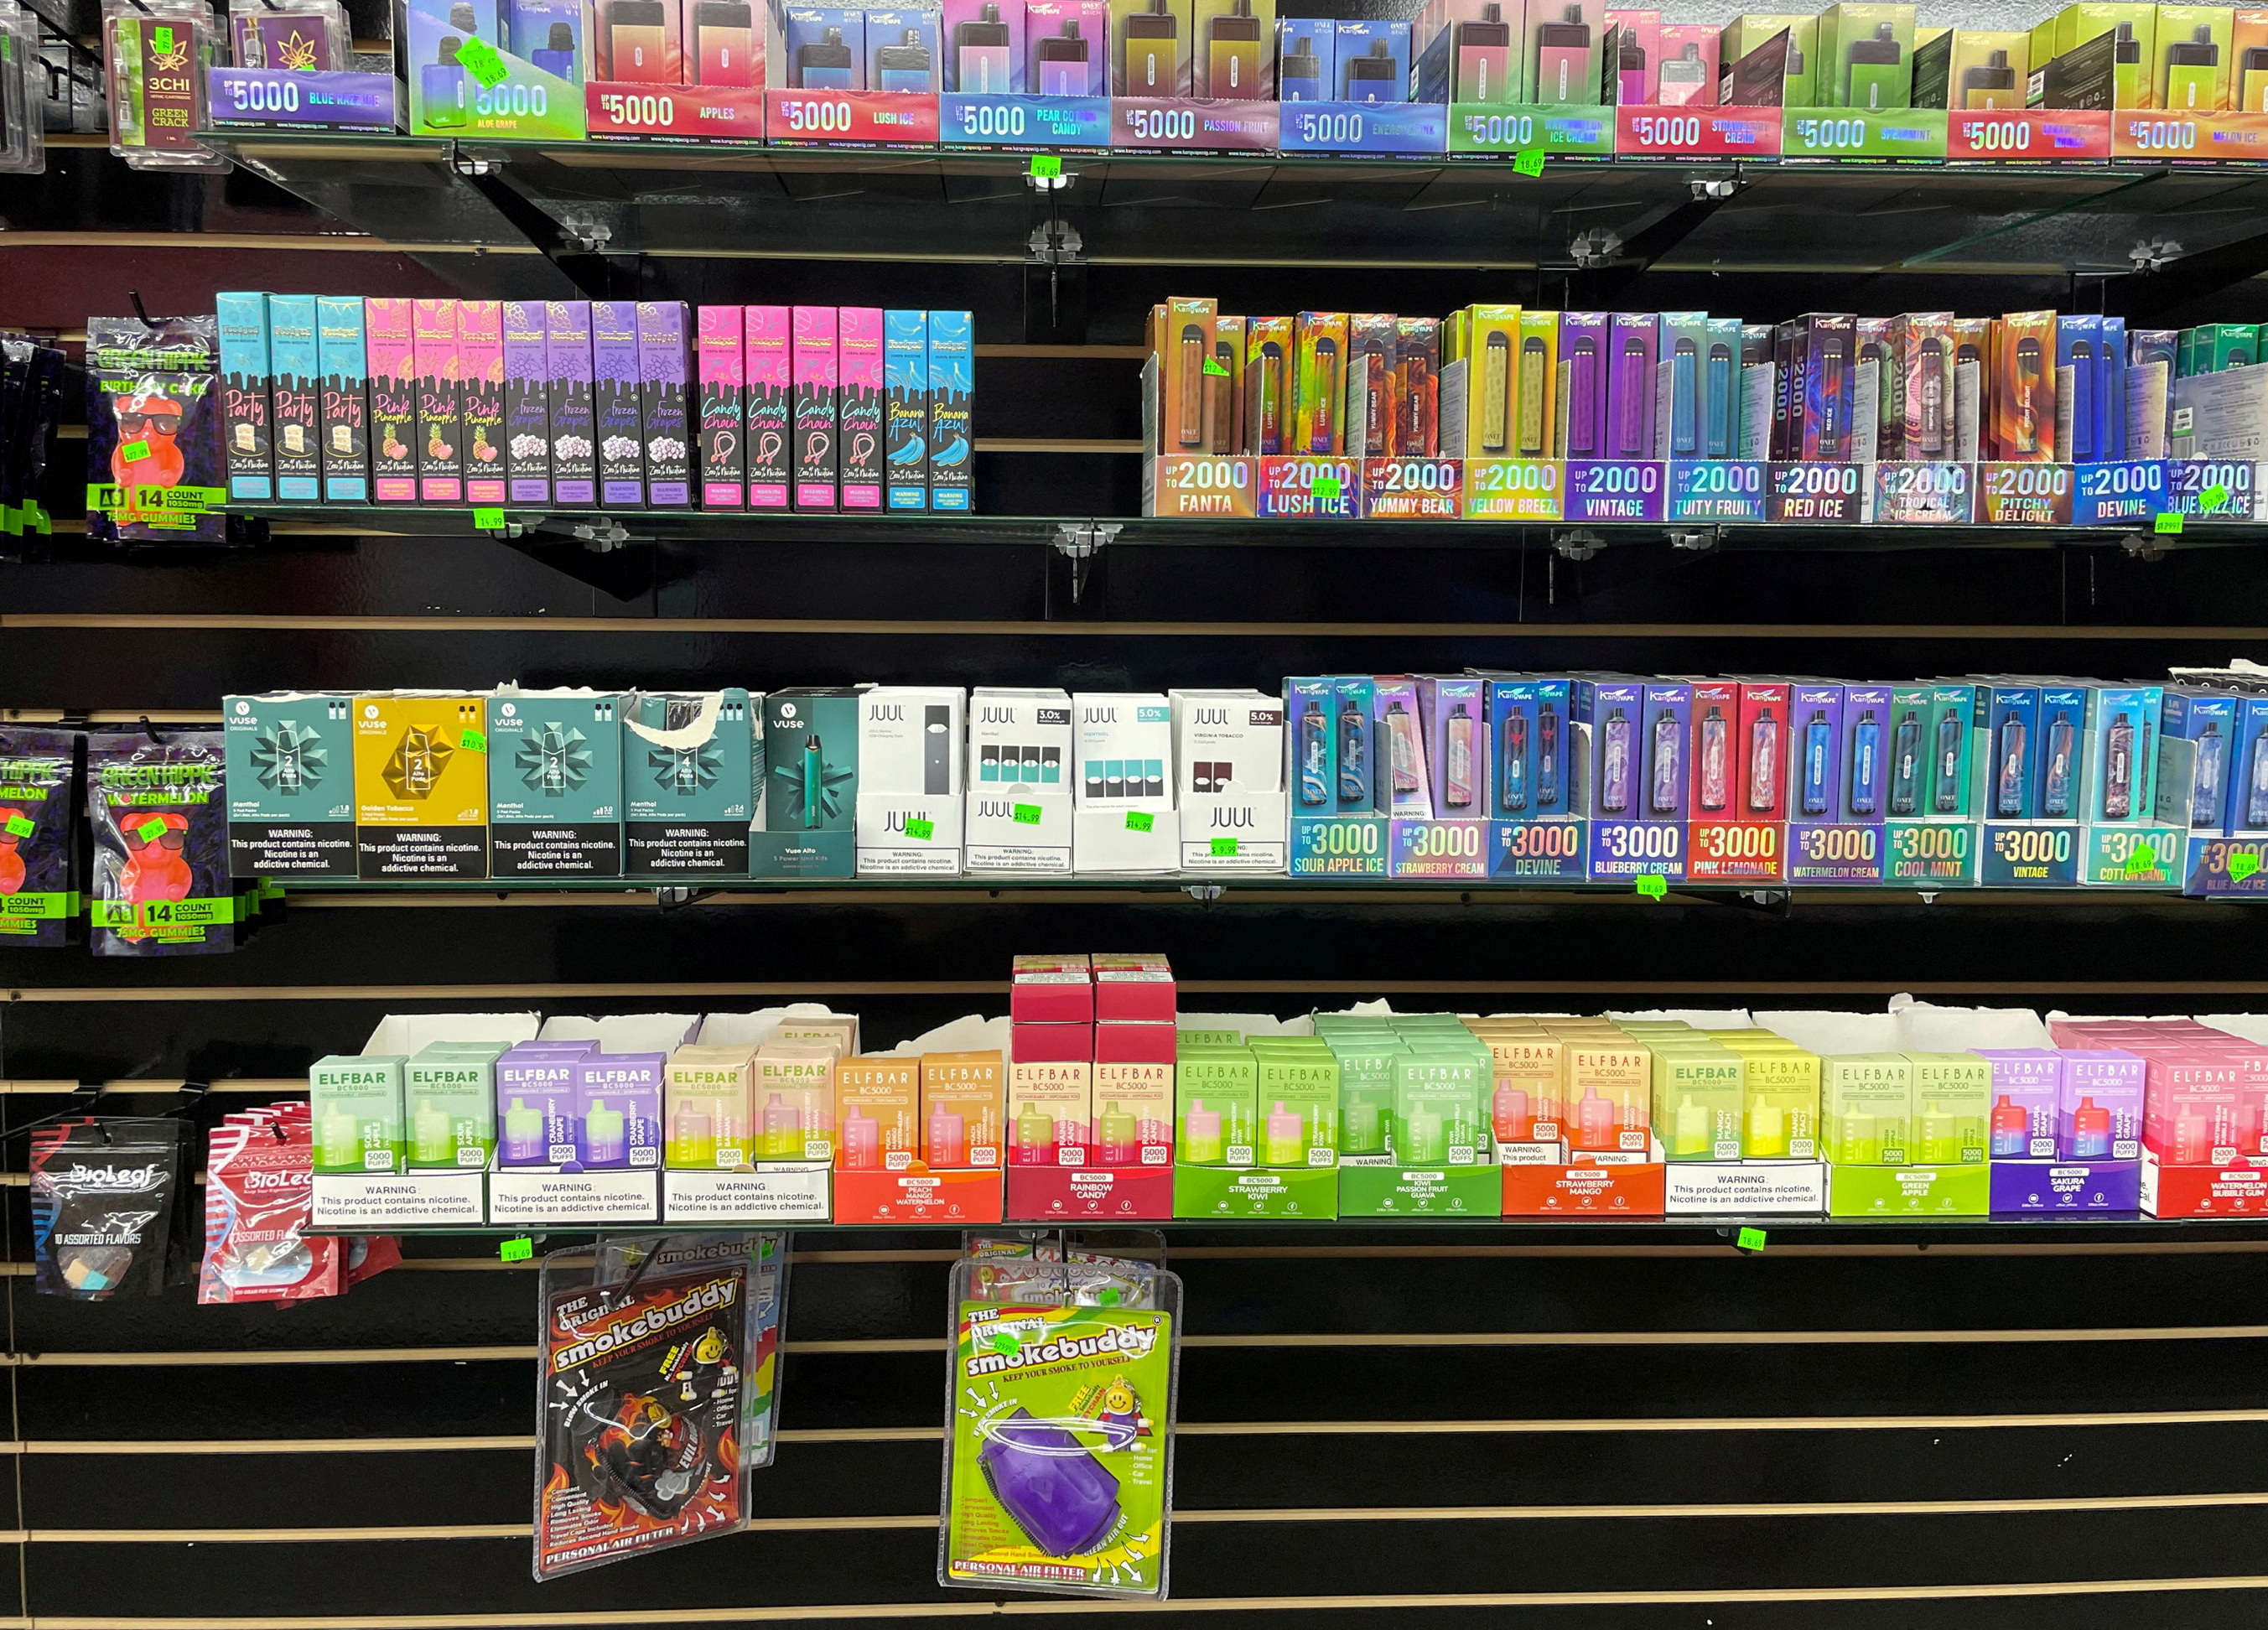 FILE PHOTO: A wall of flavored e-cigarettes in a store in Raleigh